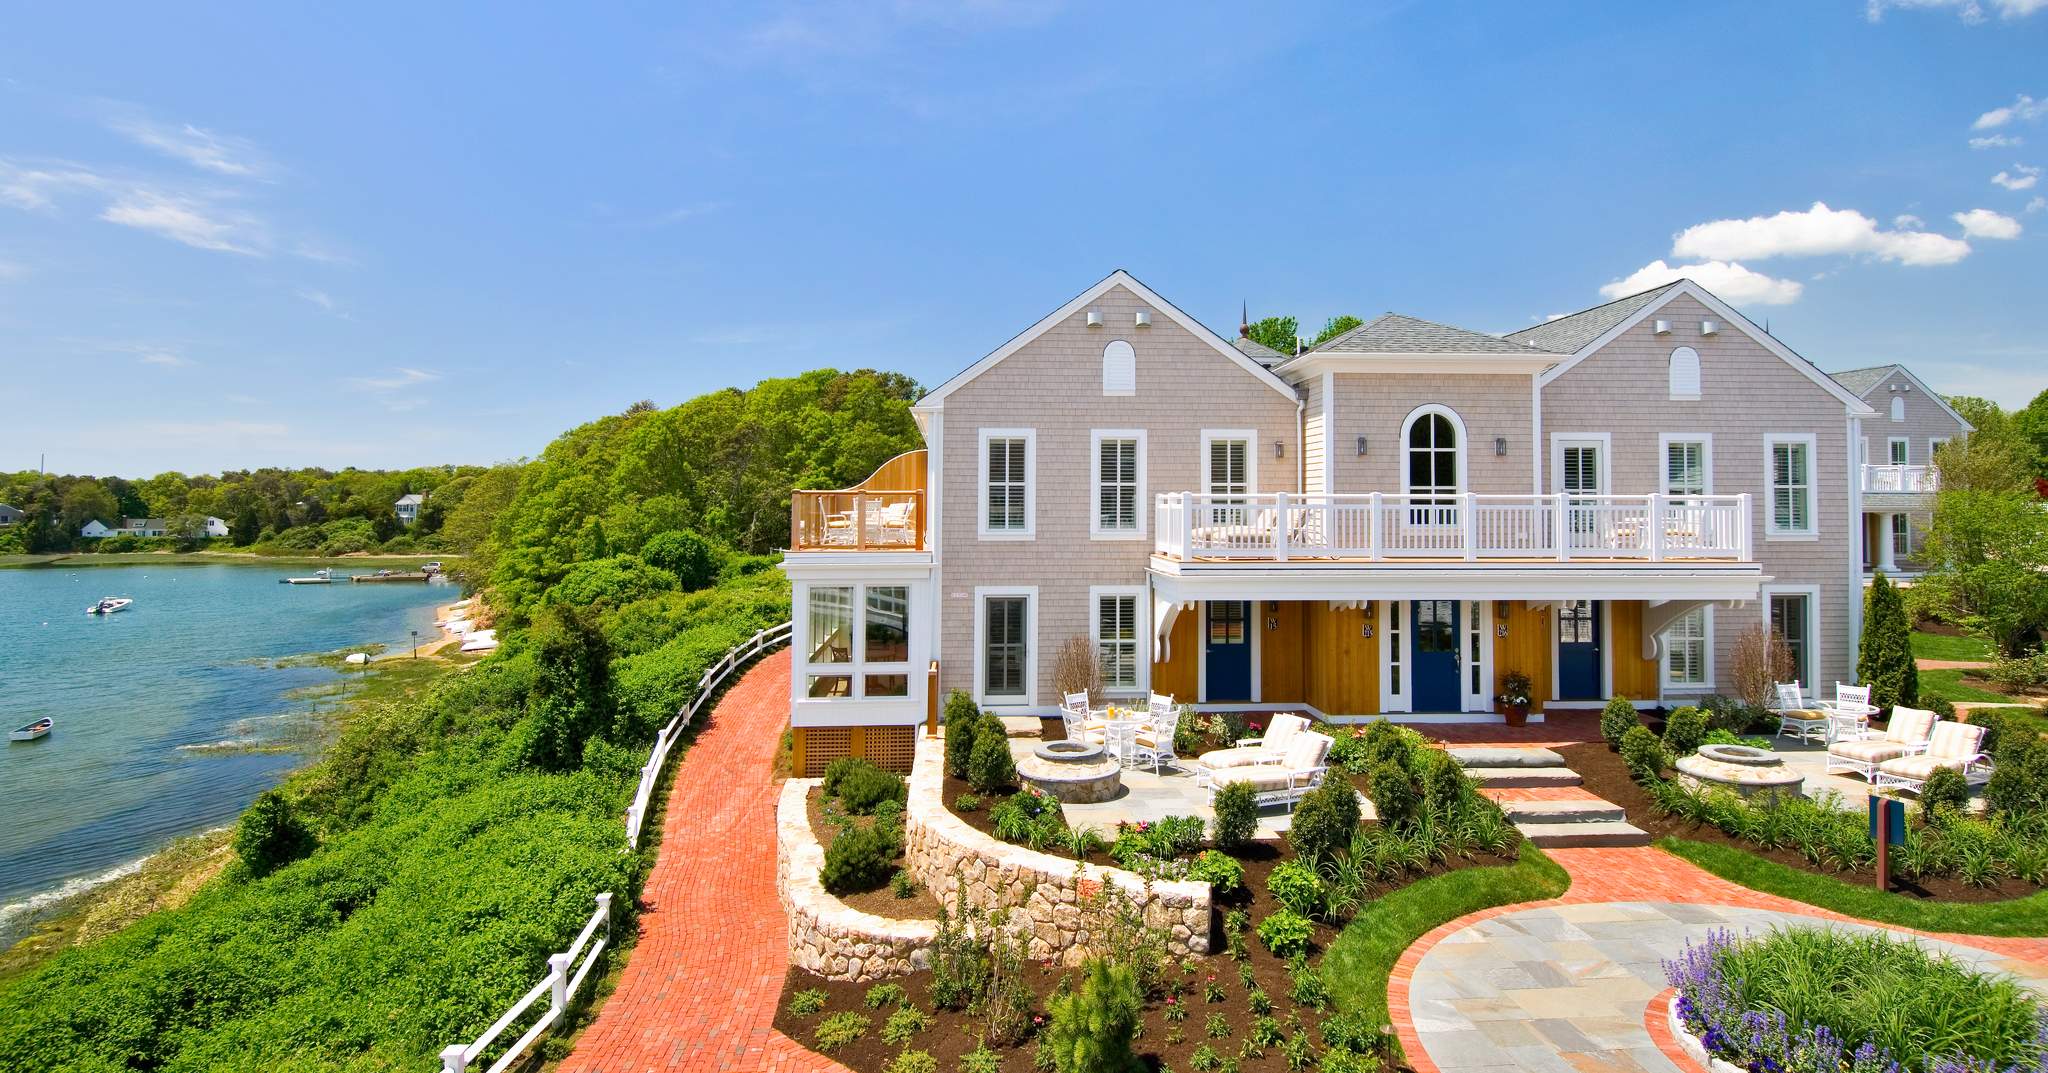 The Cape Cod Summer Rental Rush: A Surprising Silver Lining